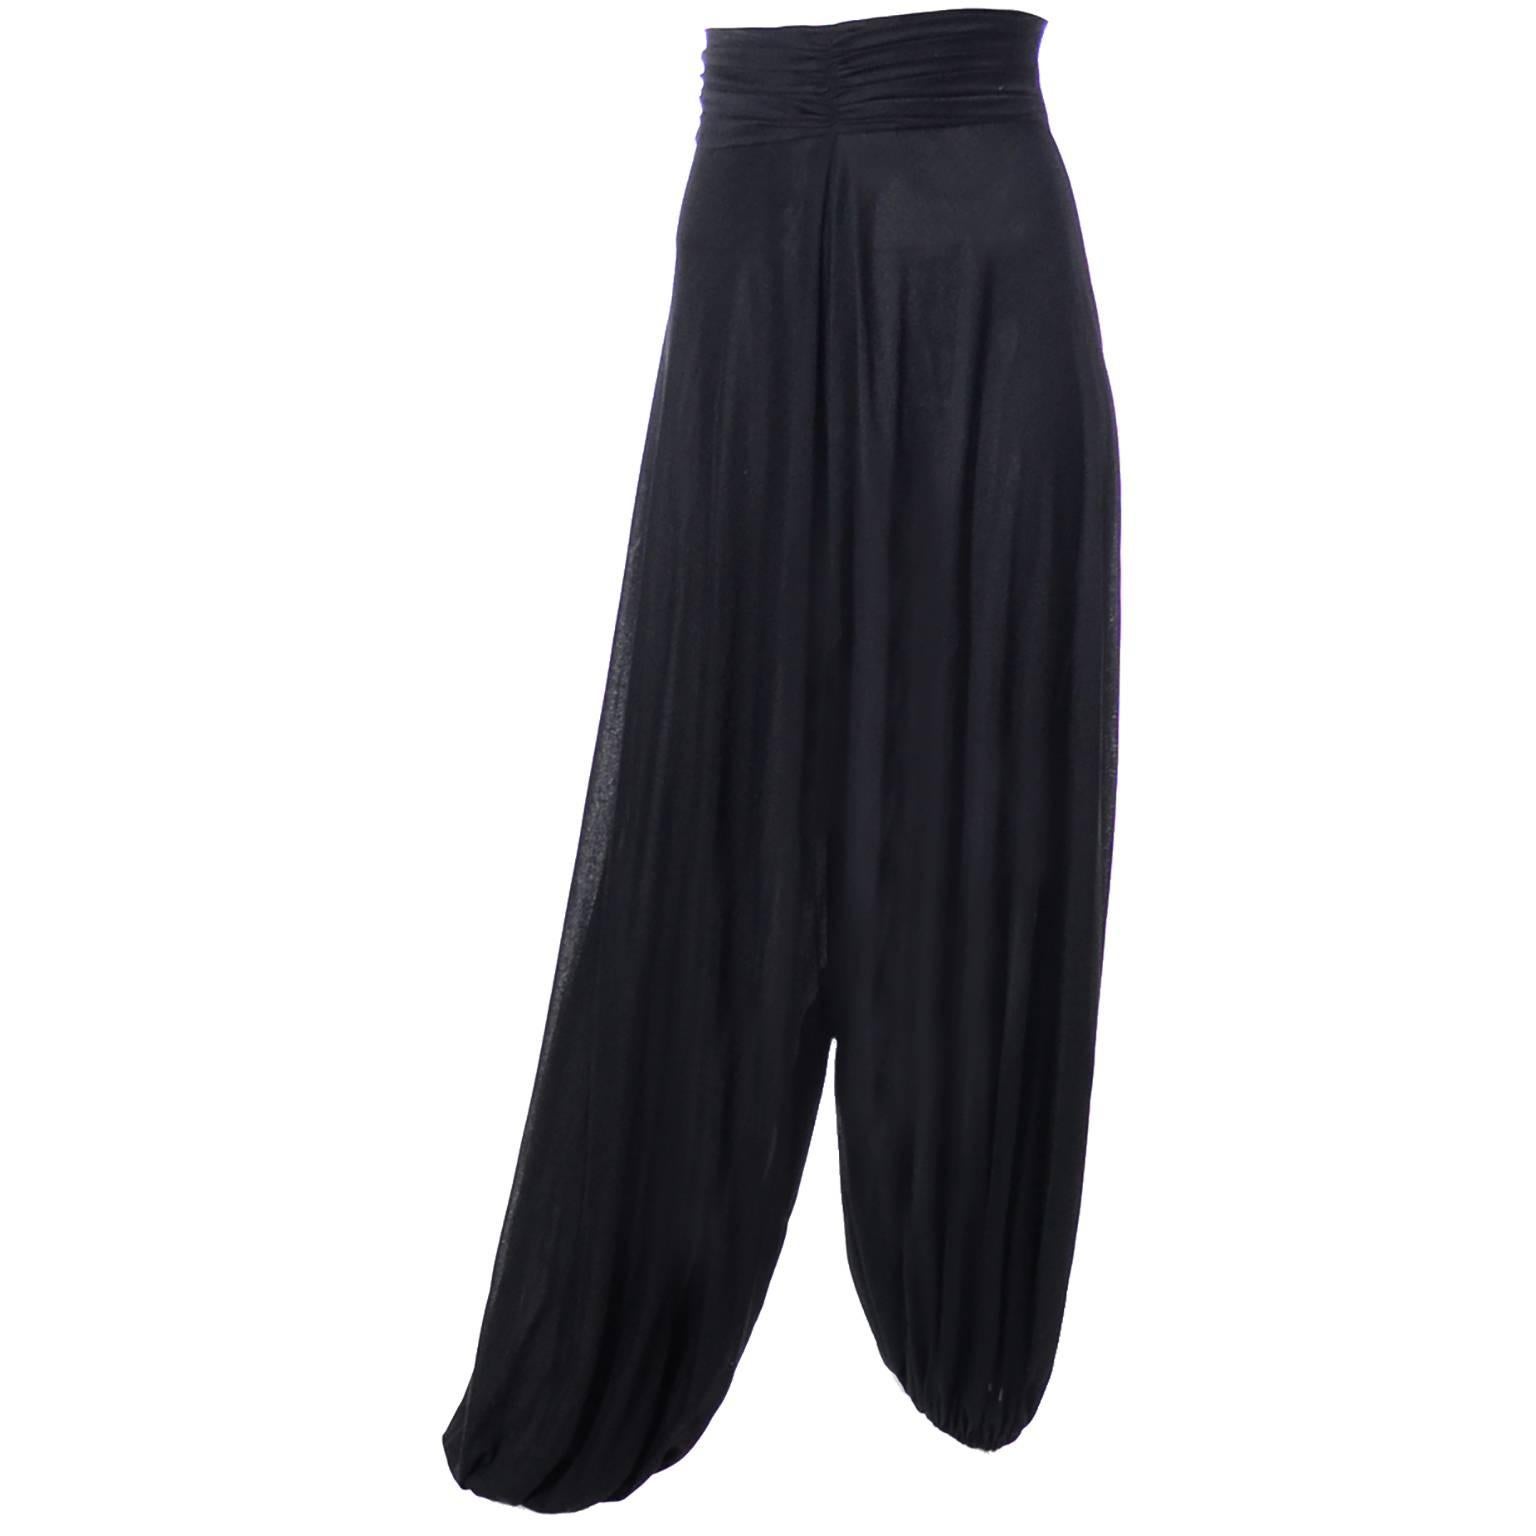 1970s Emilio Pucci Vintage Black Jersey Harem Pants Made in Italy Size 6/8